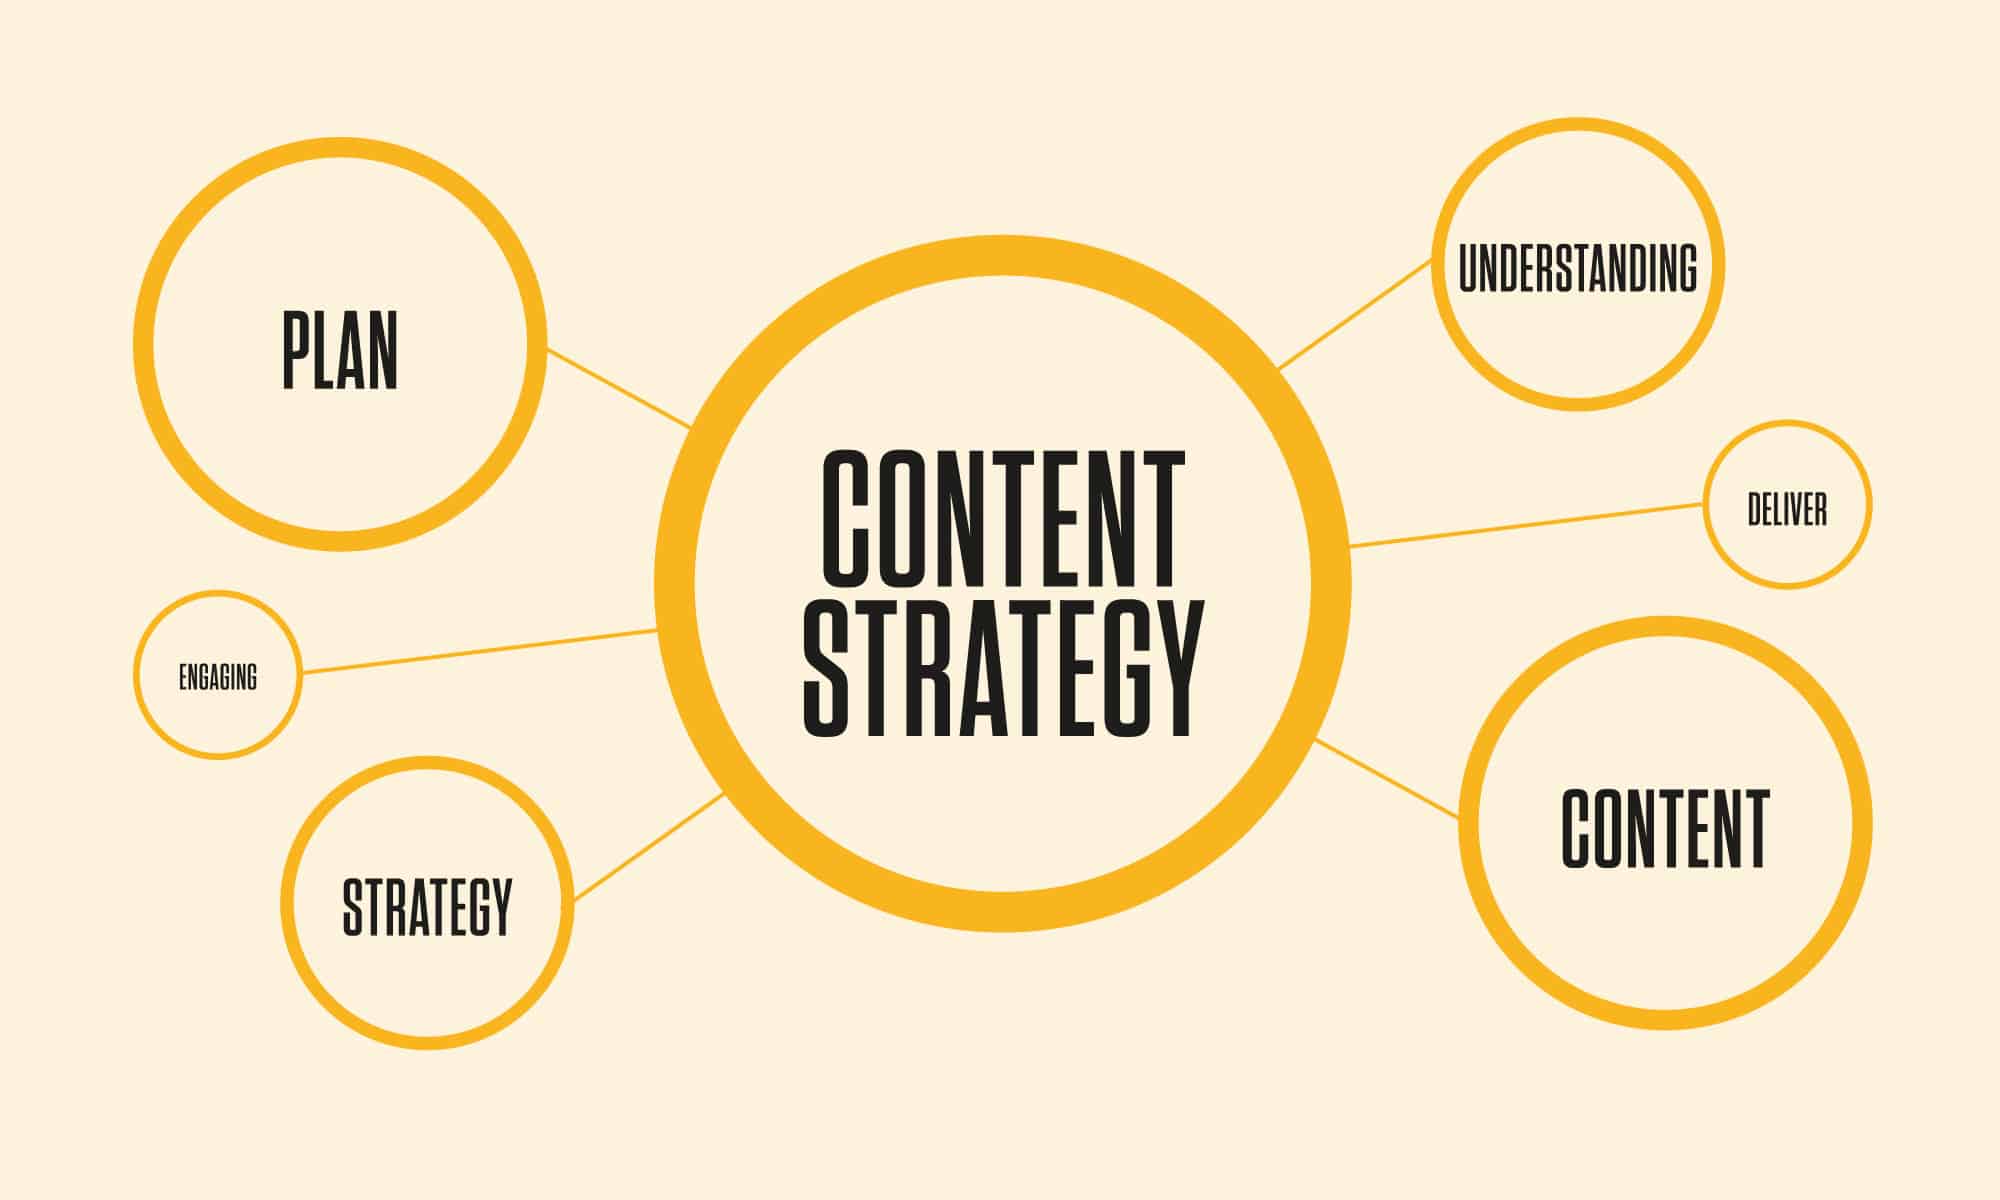 Content strategy is important planning tool for SEO growth.